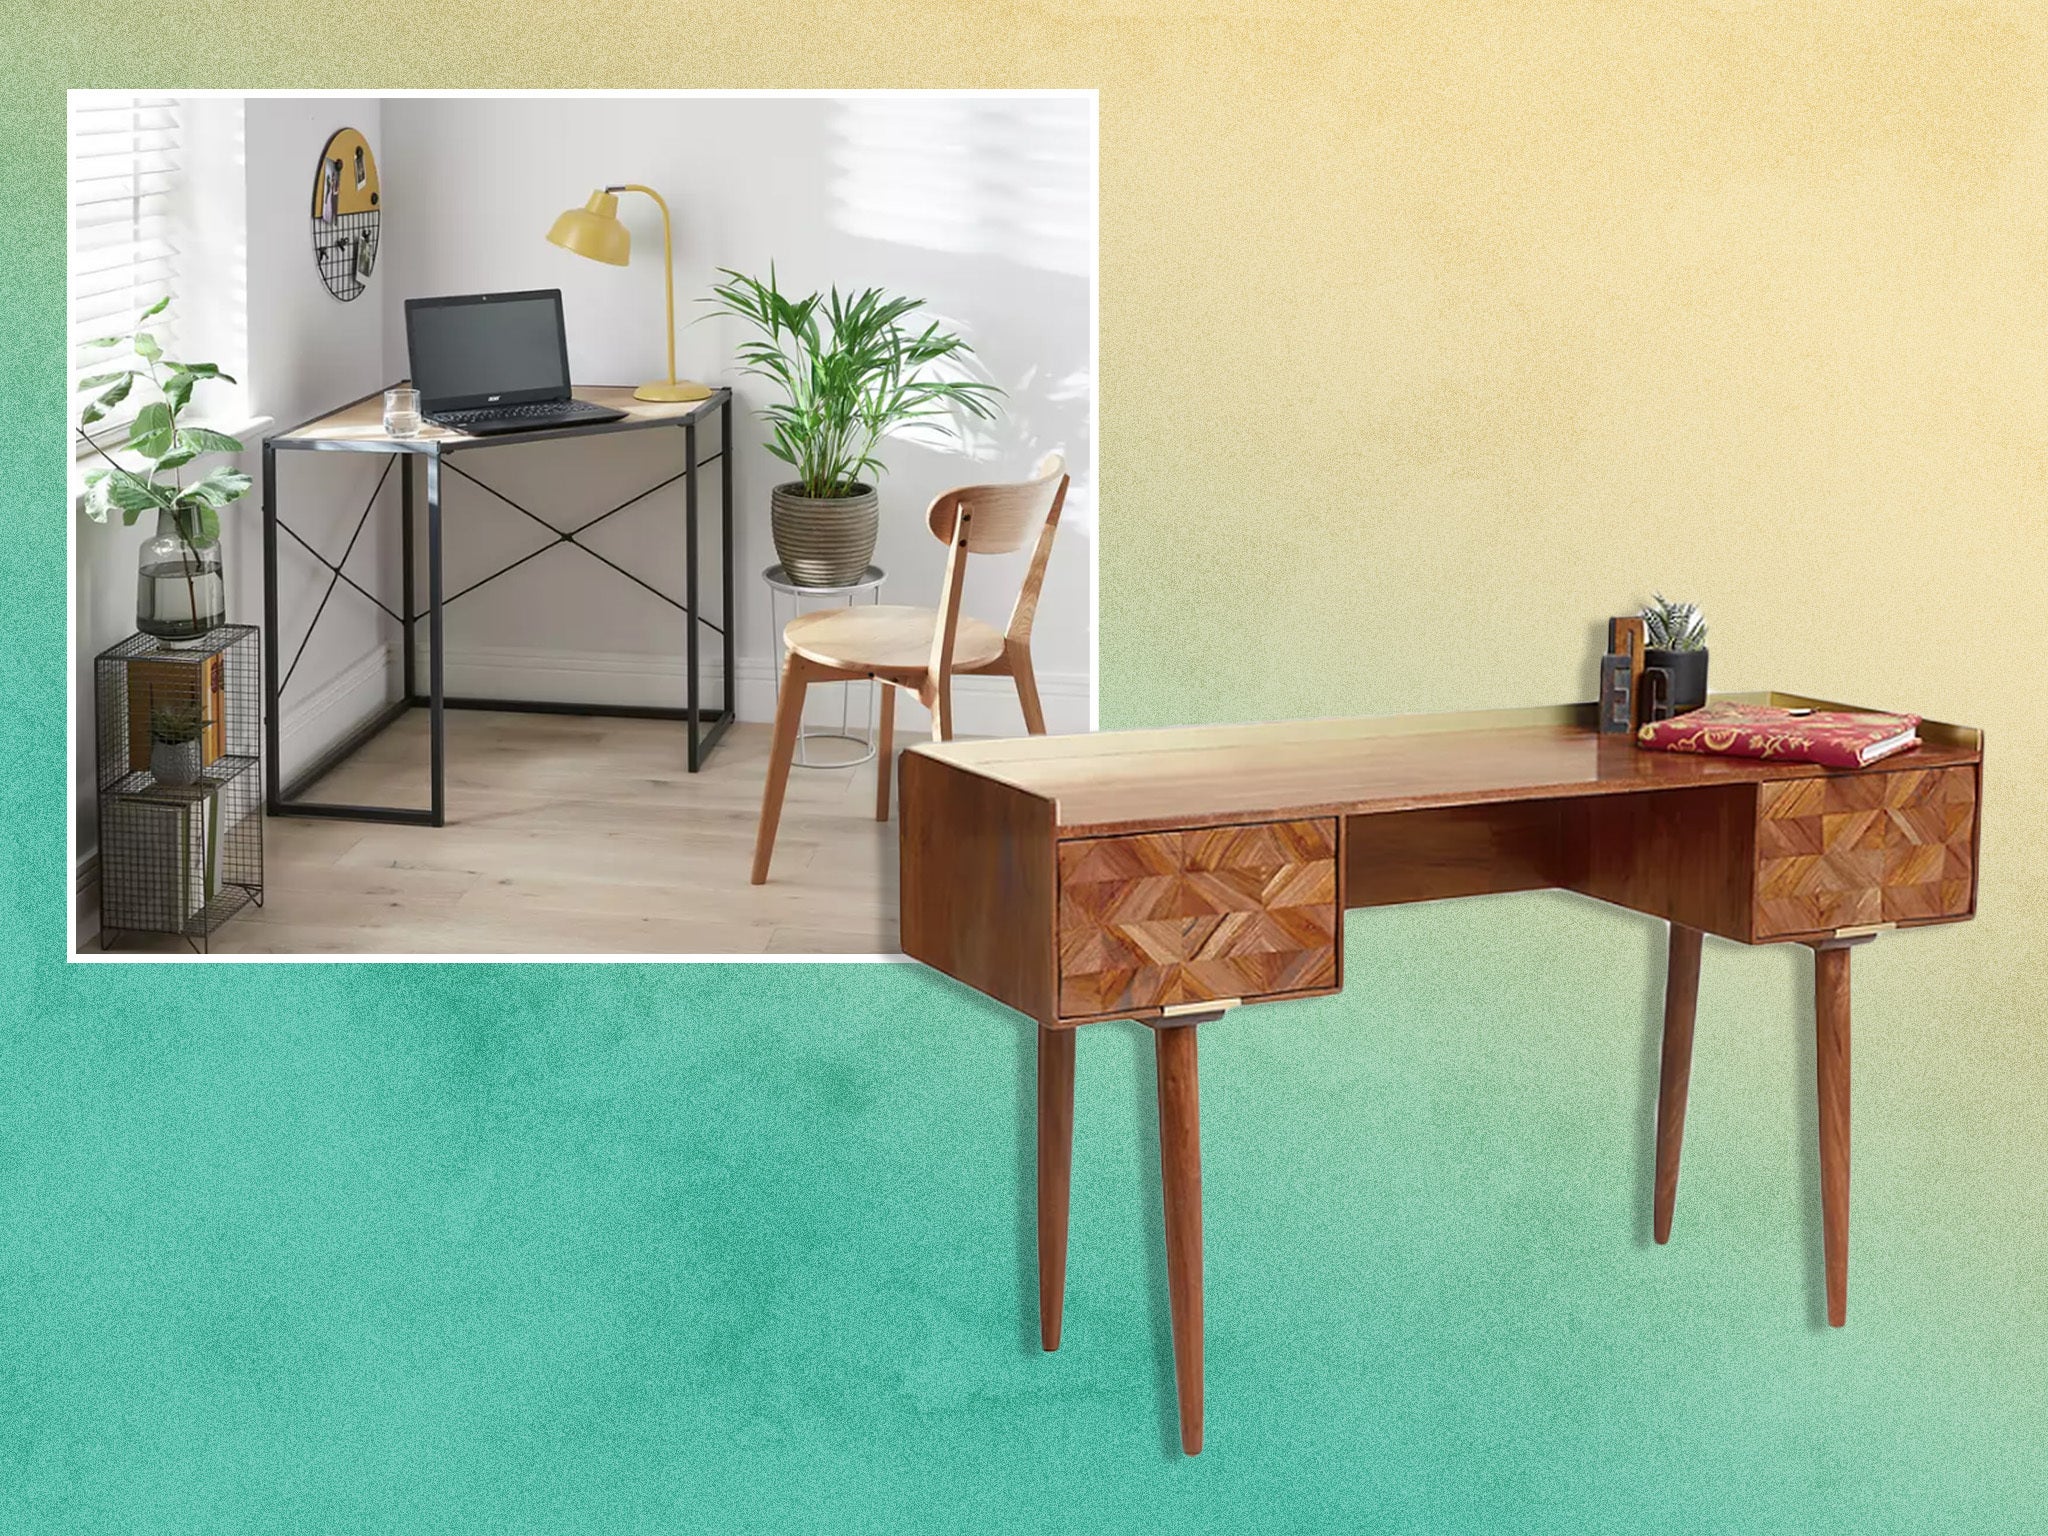 Finding the right desk, whether you’re setting it up in the bedroom, corner of the living room, or dedicated study space, can be a tall order